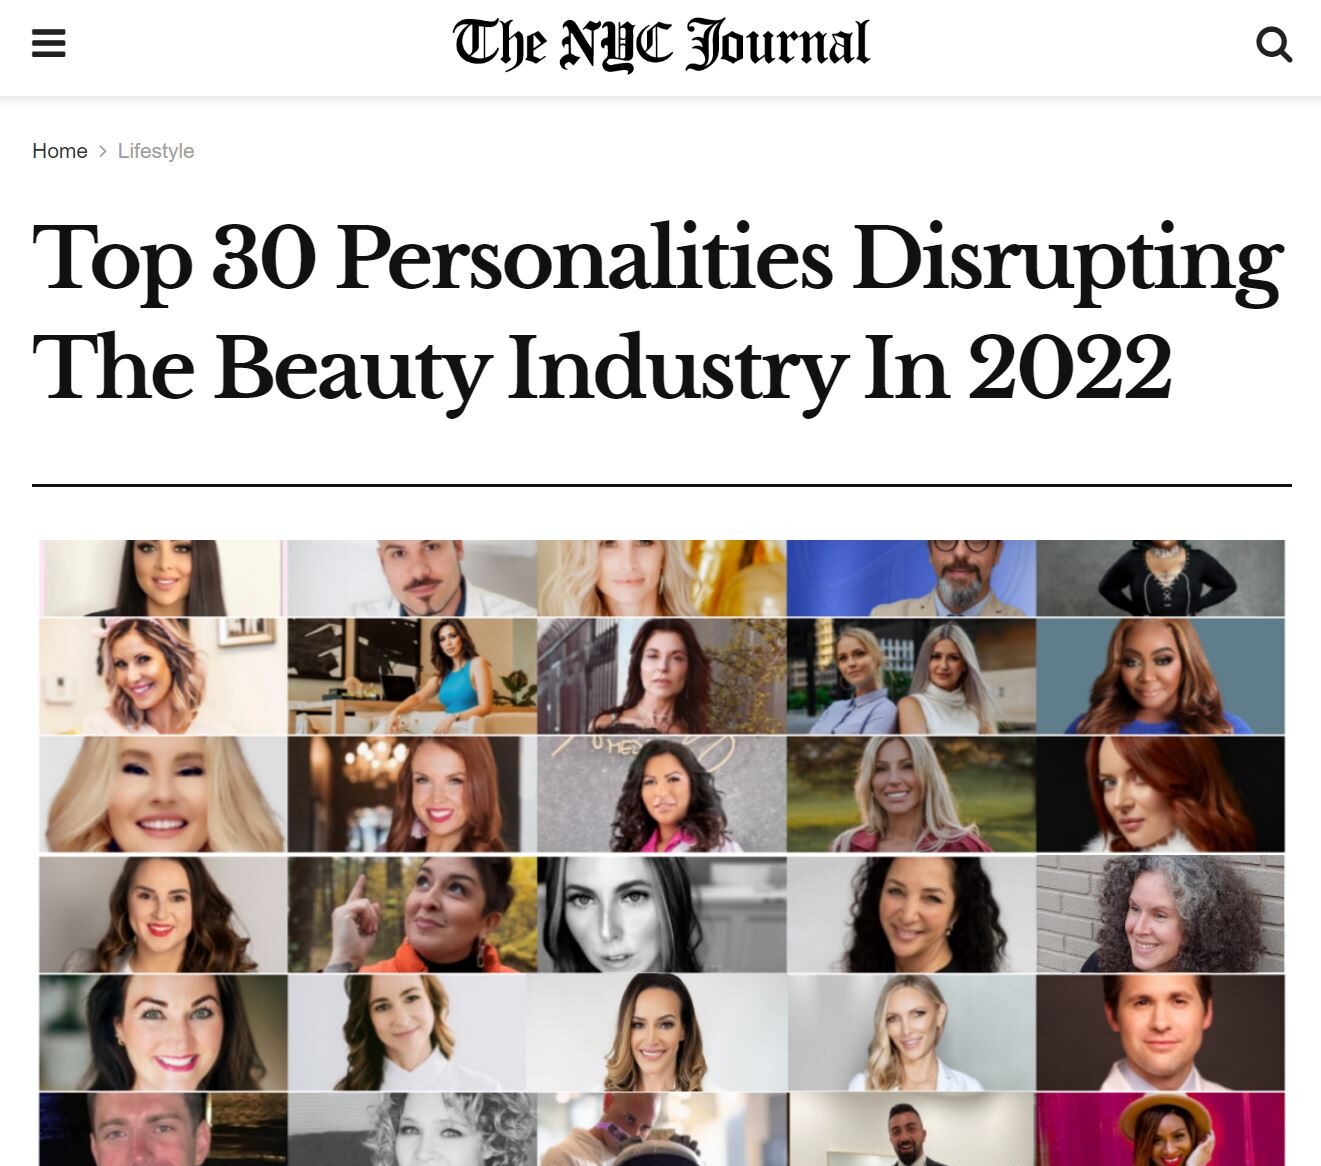 SCALPS CO - Top 30 Personalities Disrupting The Beauty Industry In 2022